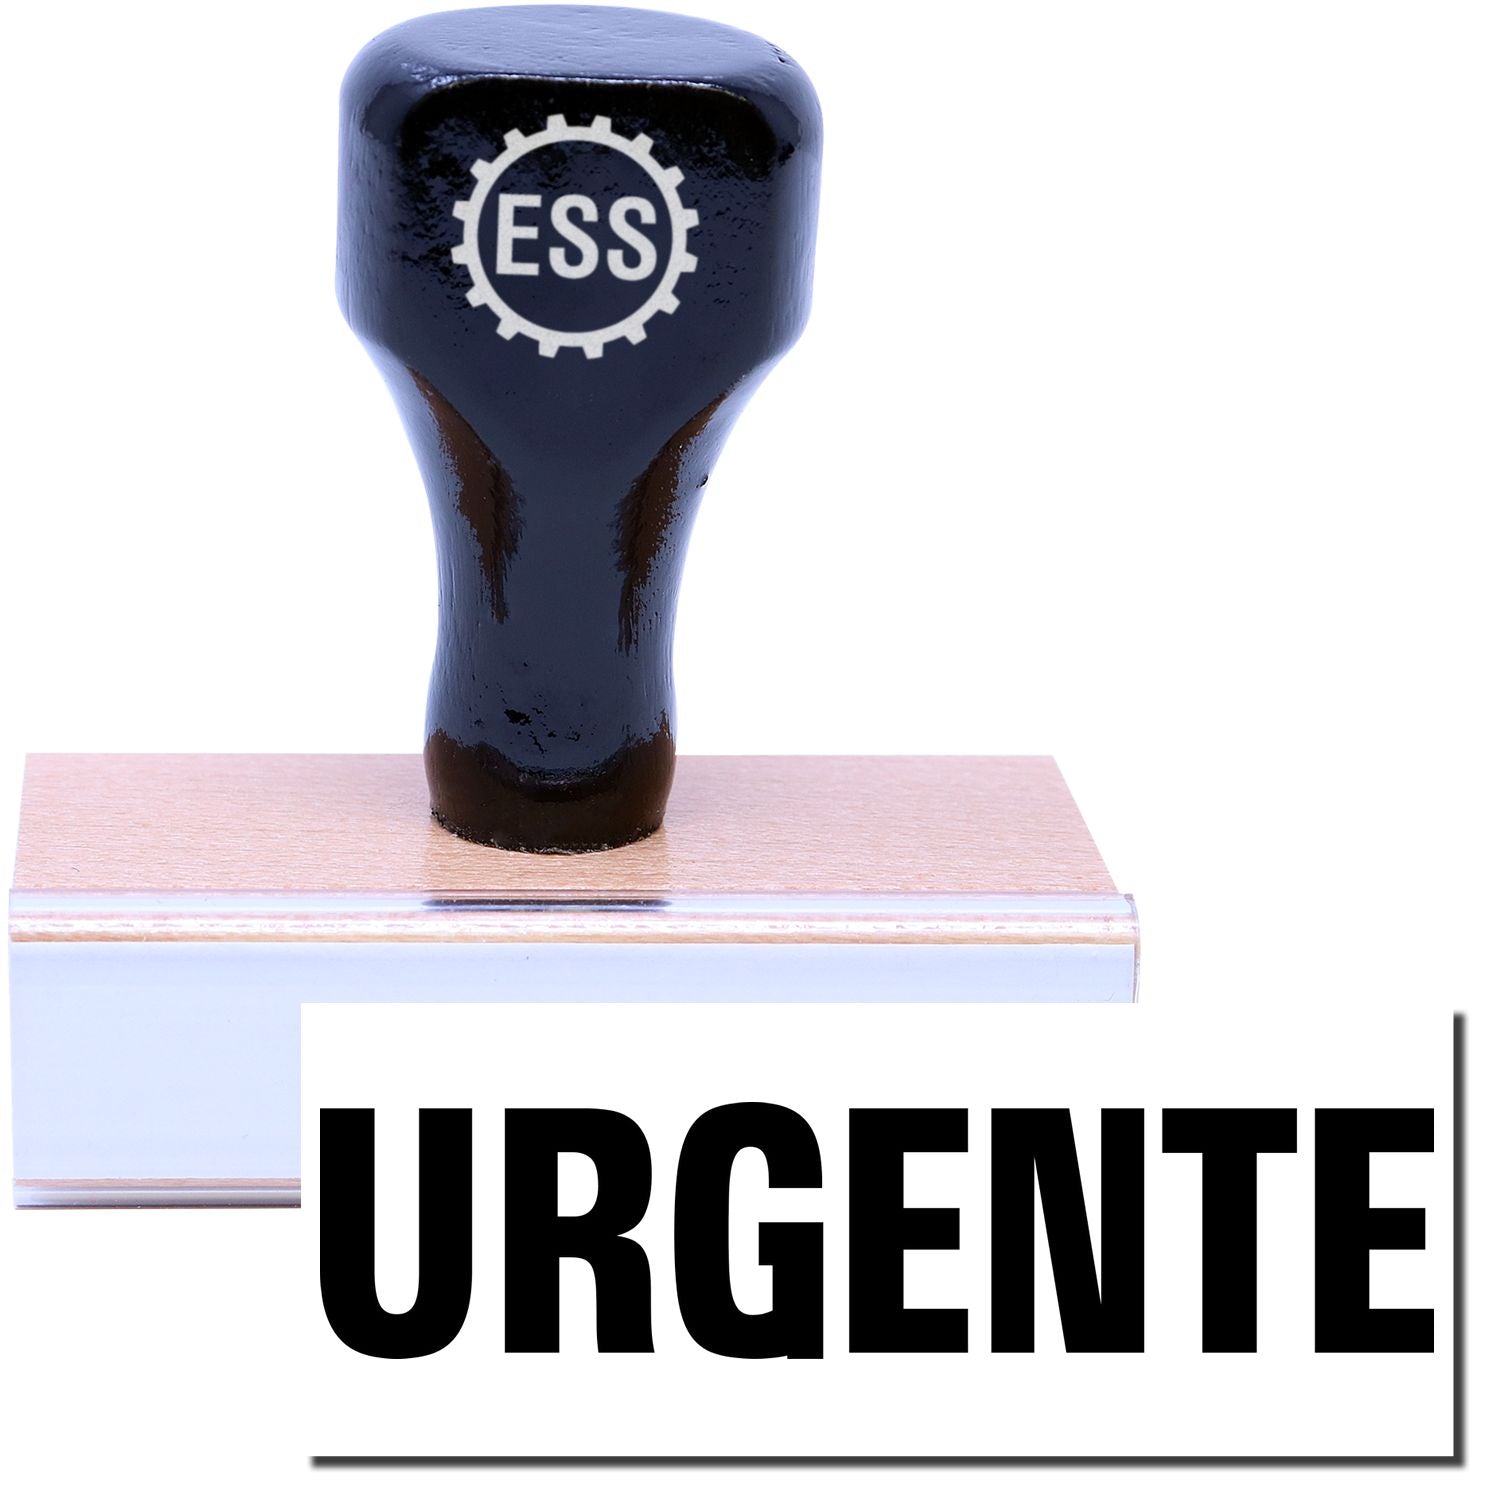 A stock office rubber stamp with a stamped image showing how the text "URGENTE" is displayed after stamping.